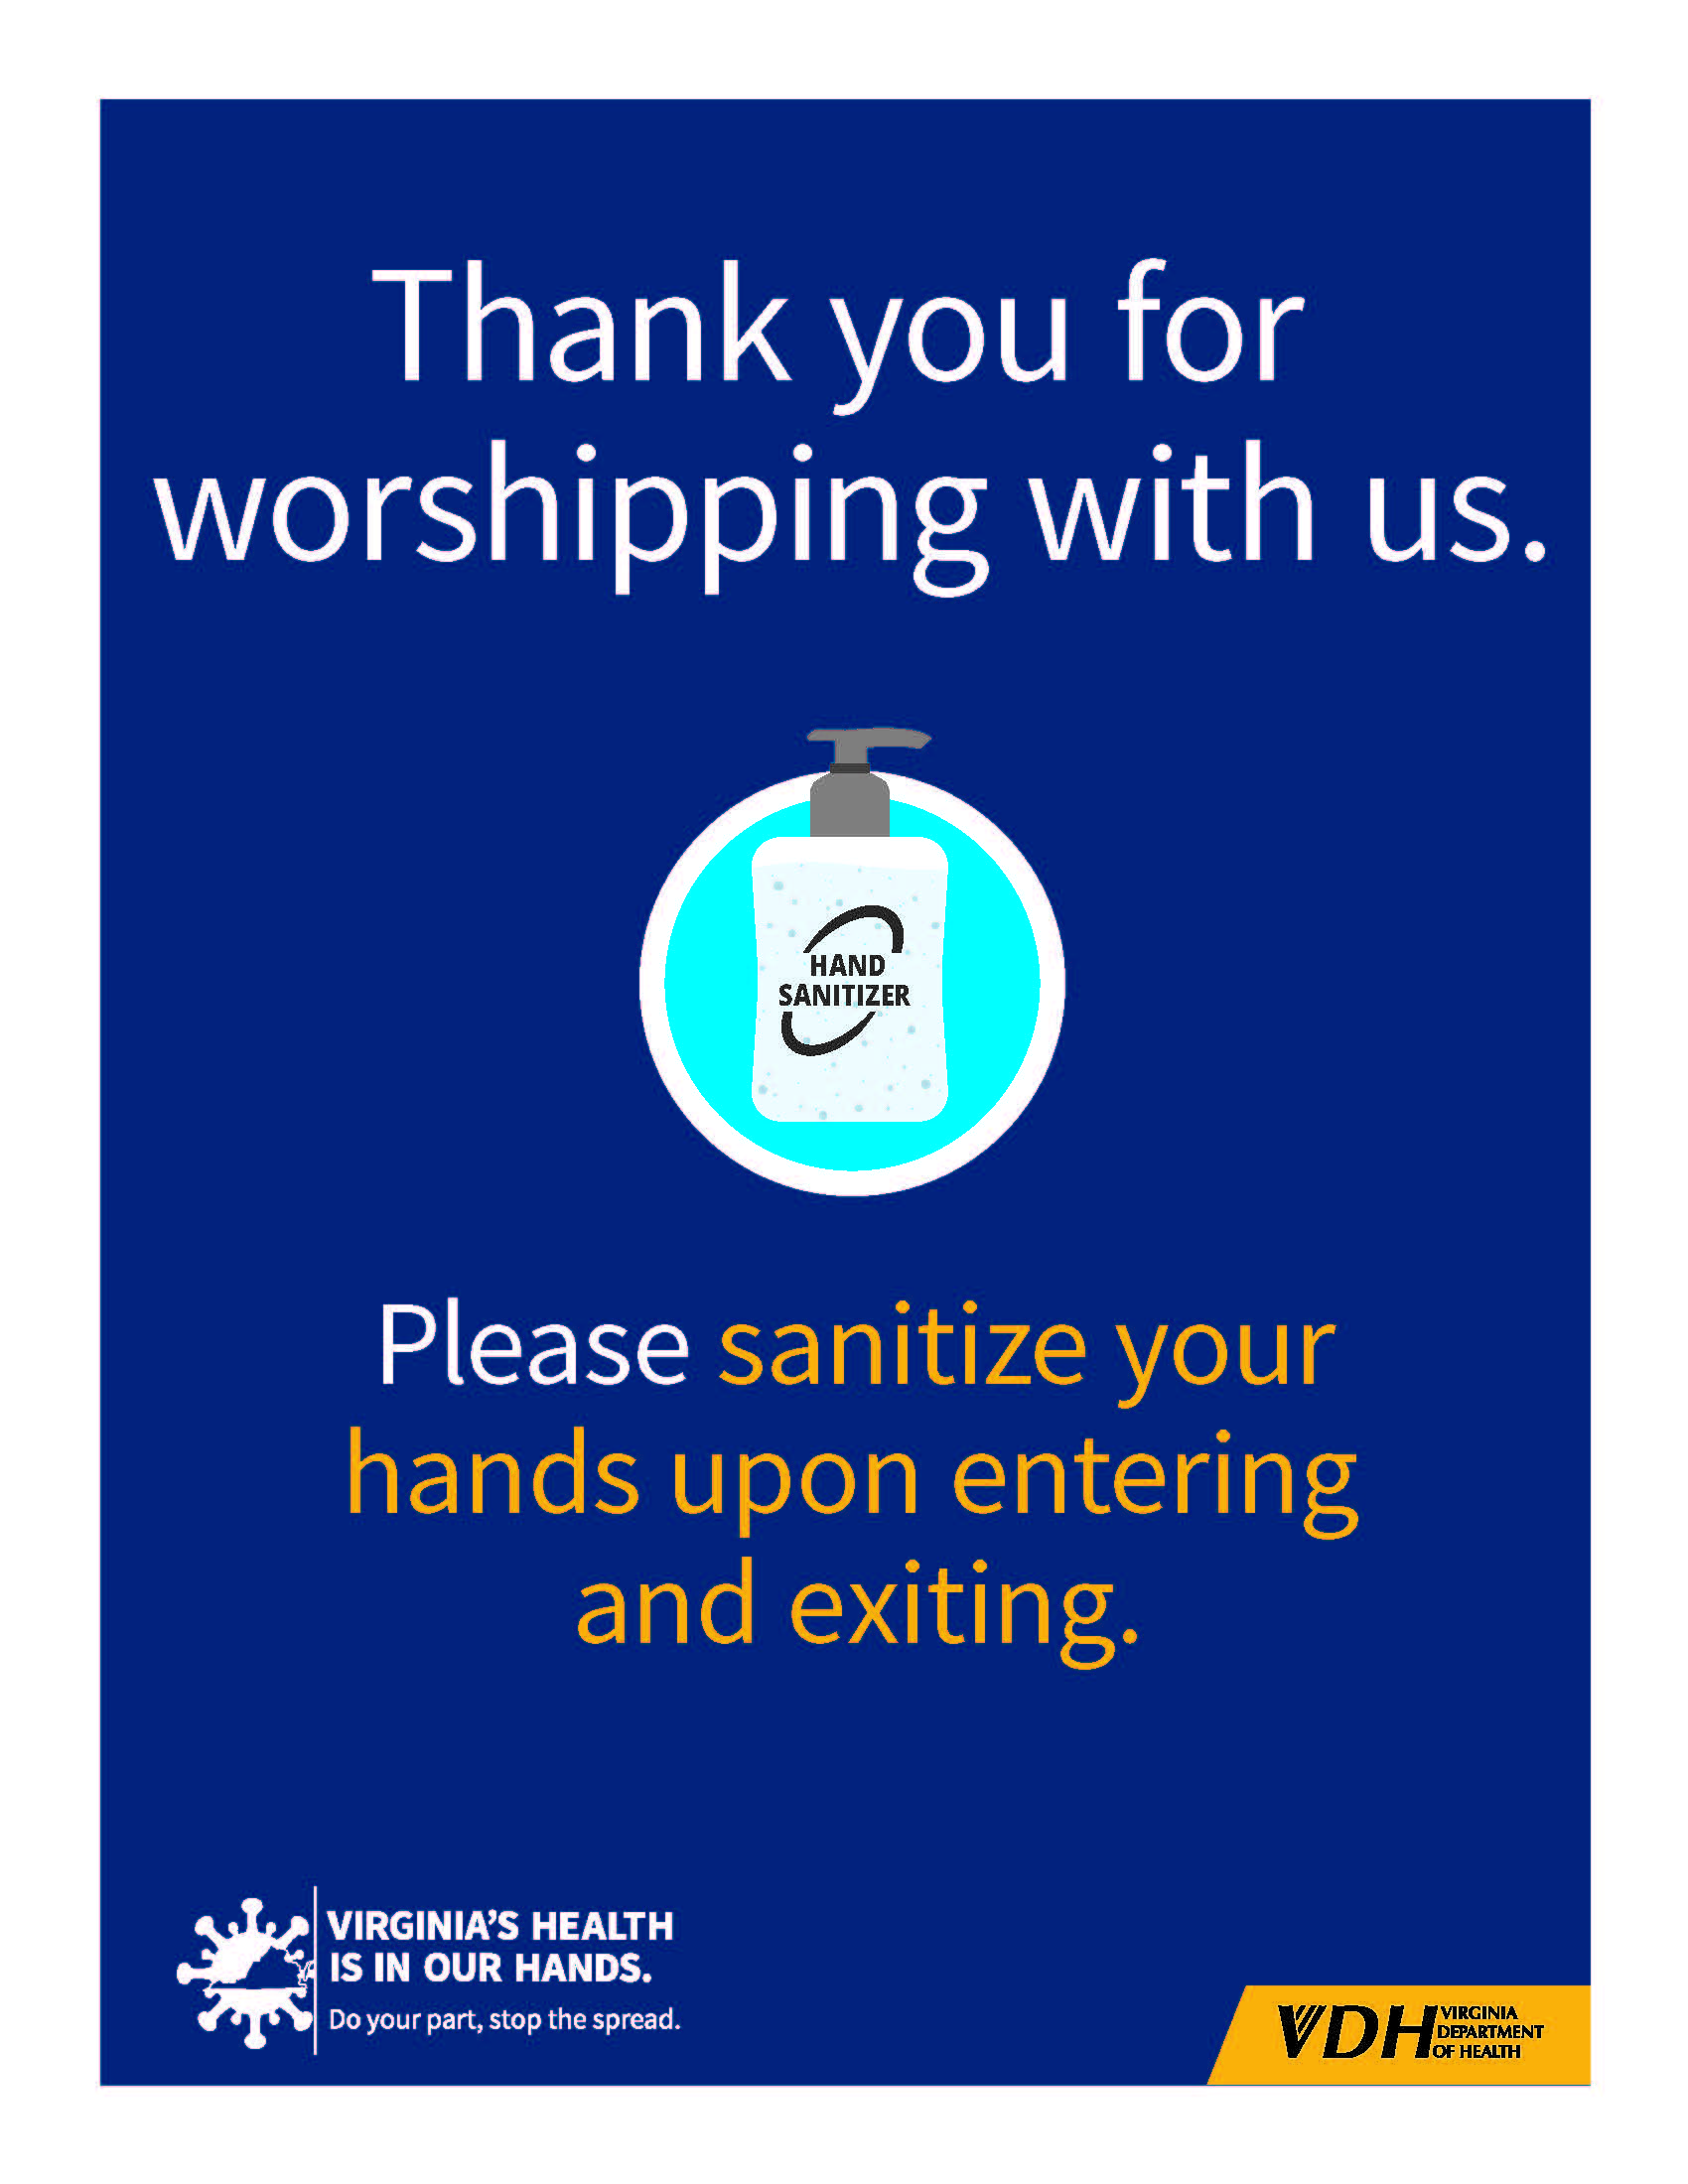 Thank you for worshiping with us blue background